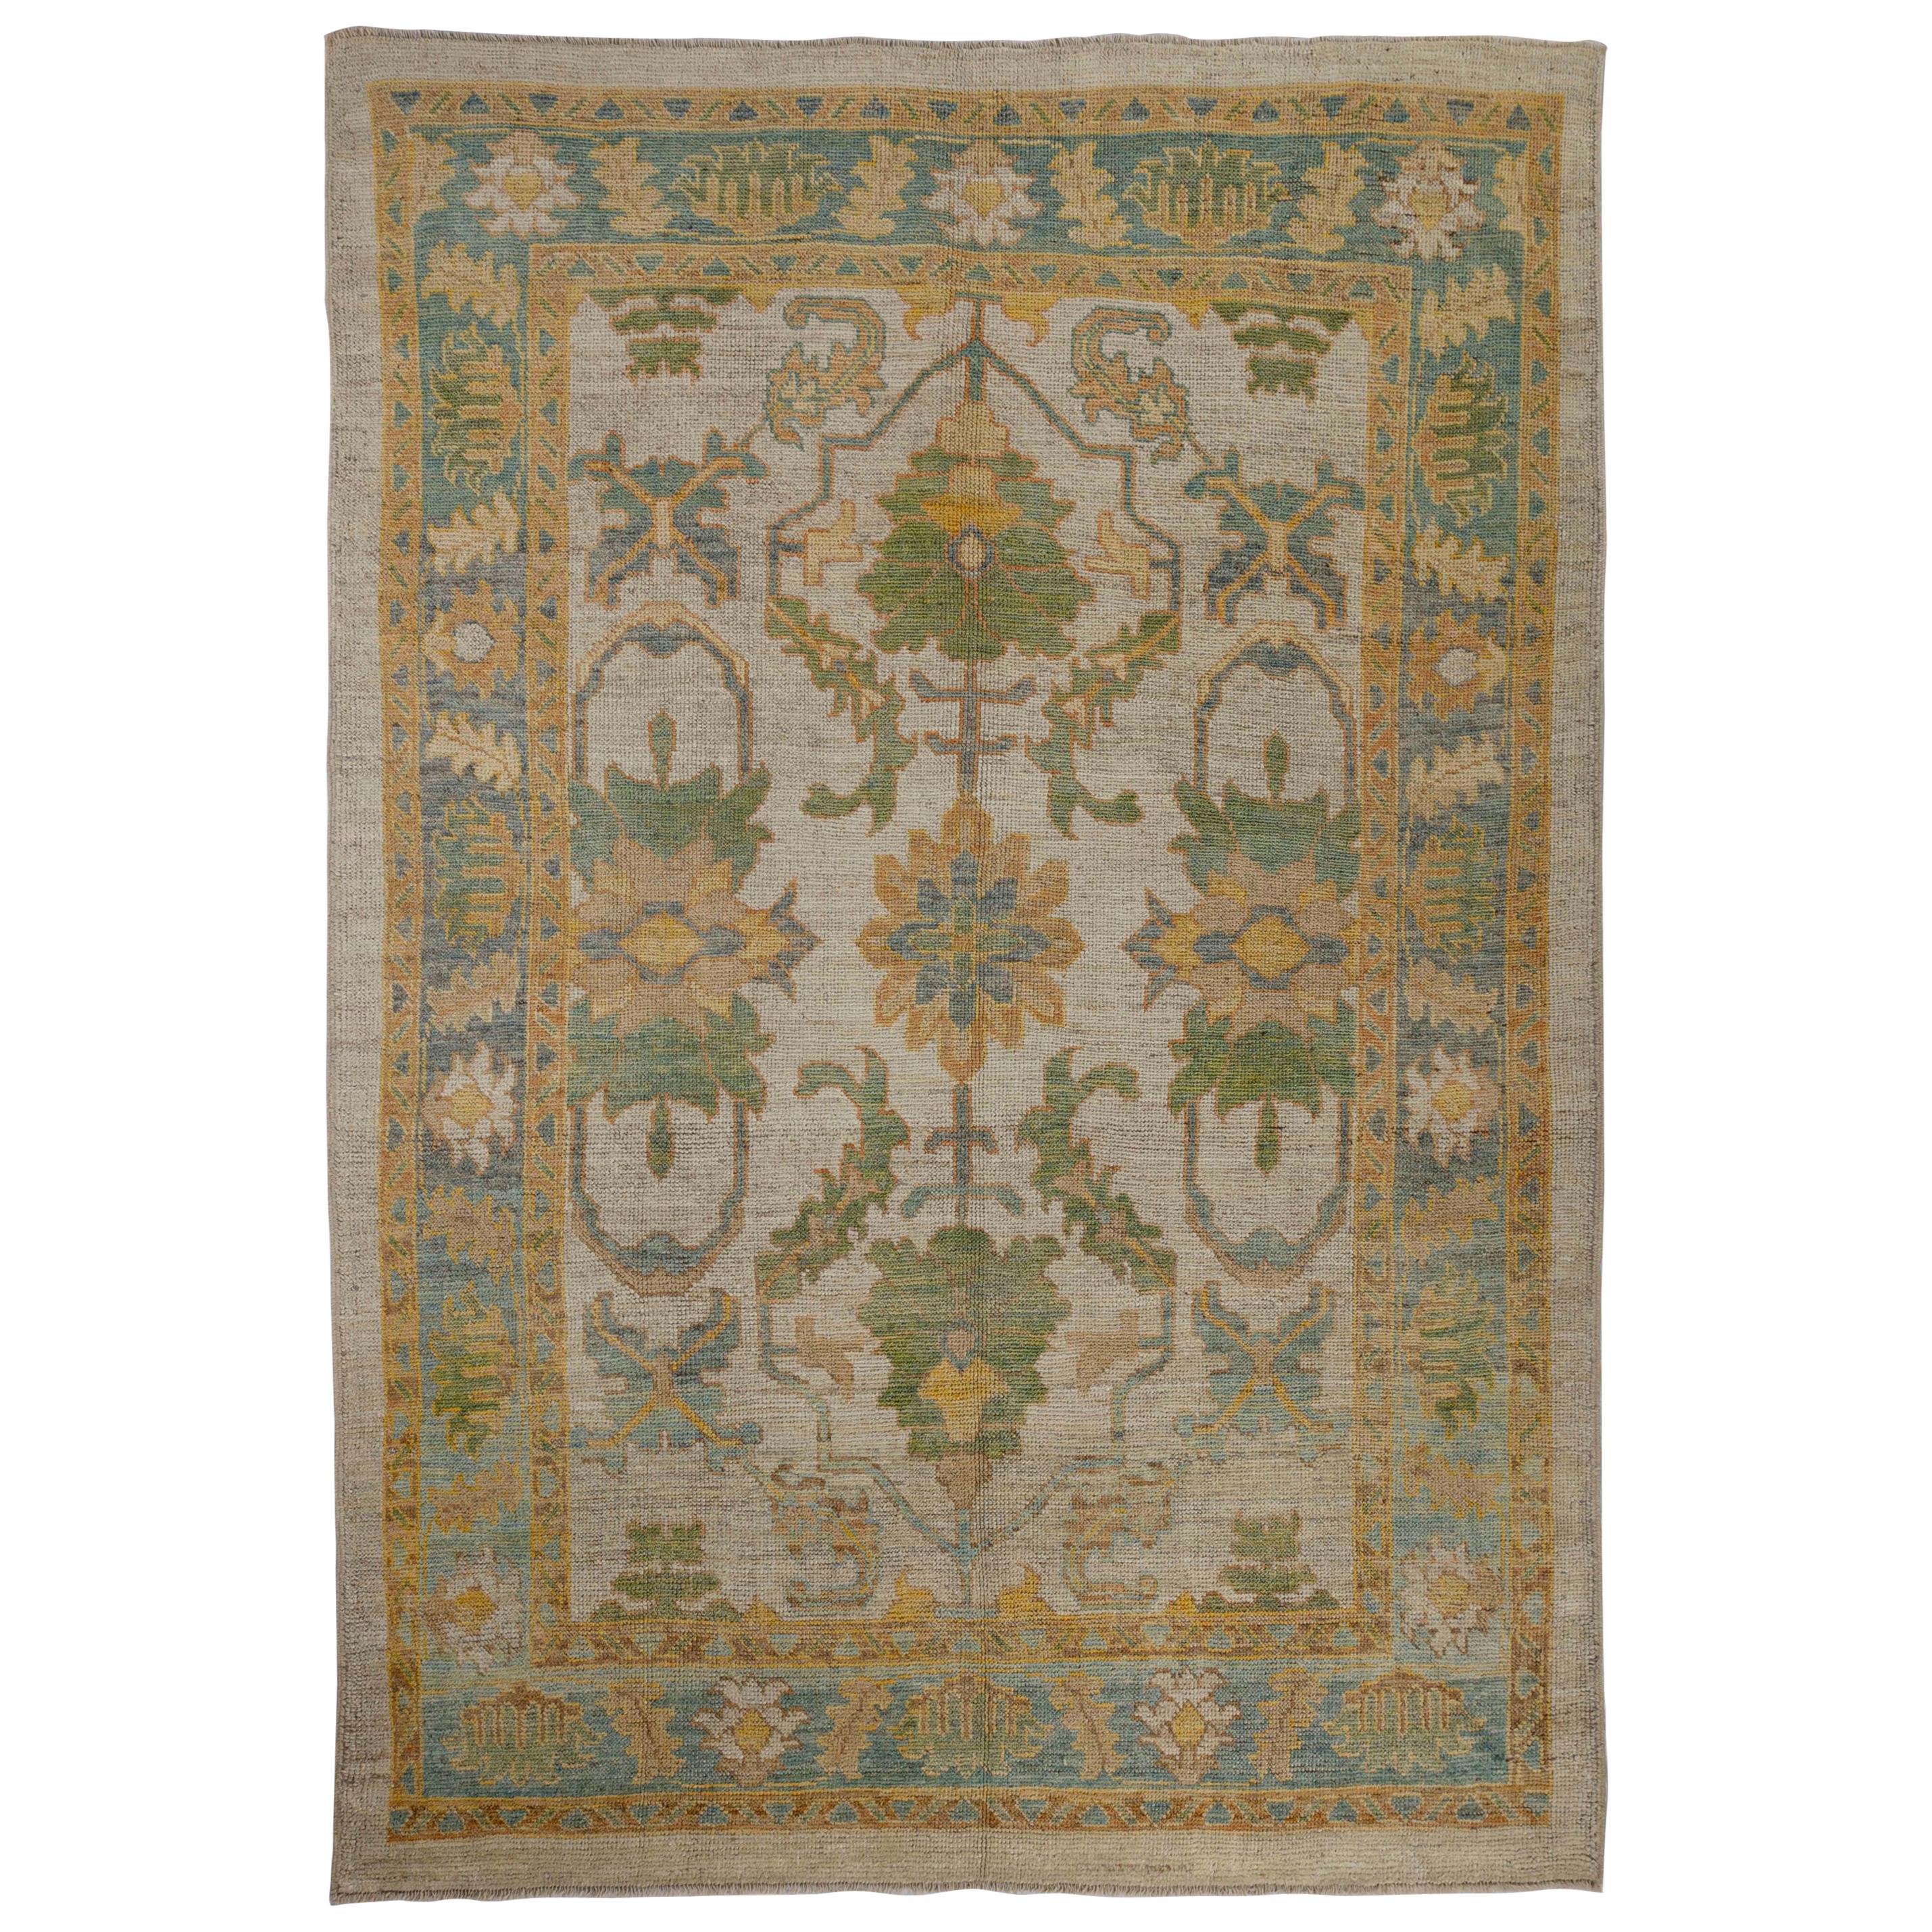 Contemporary Turkish Oushak Rug with Green and Blue Floral Patterns For Sale